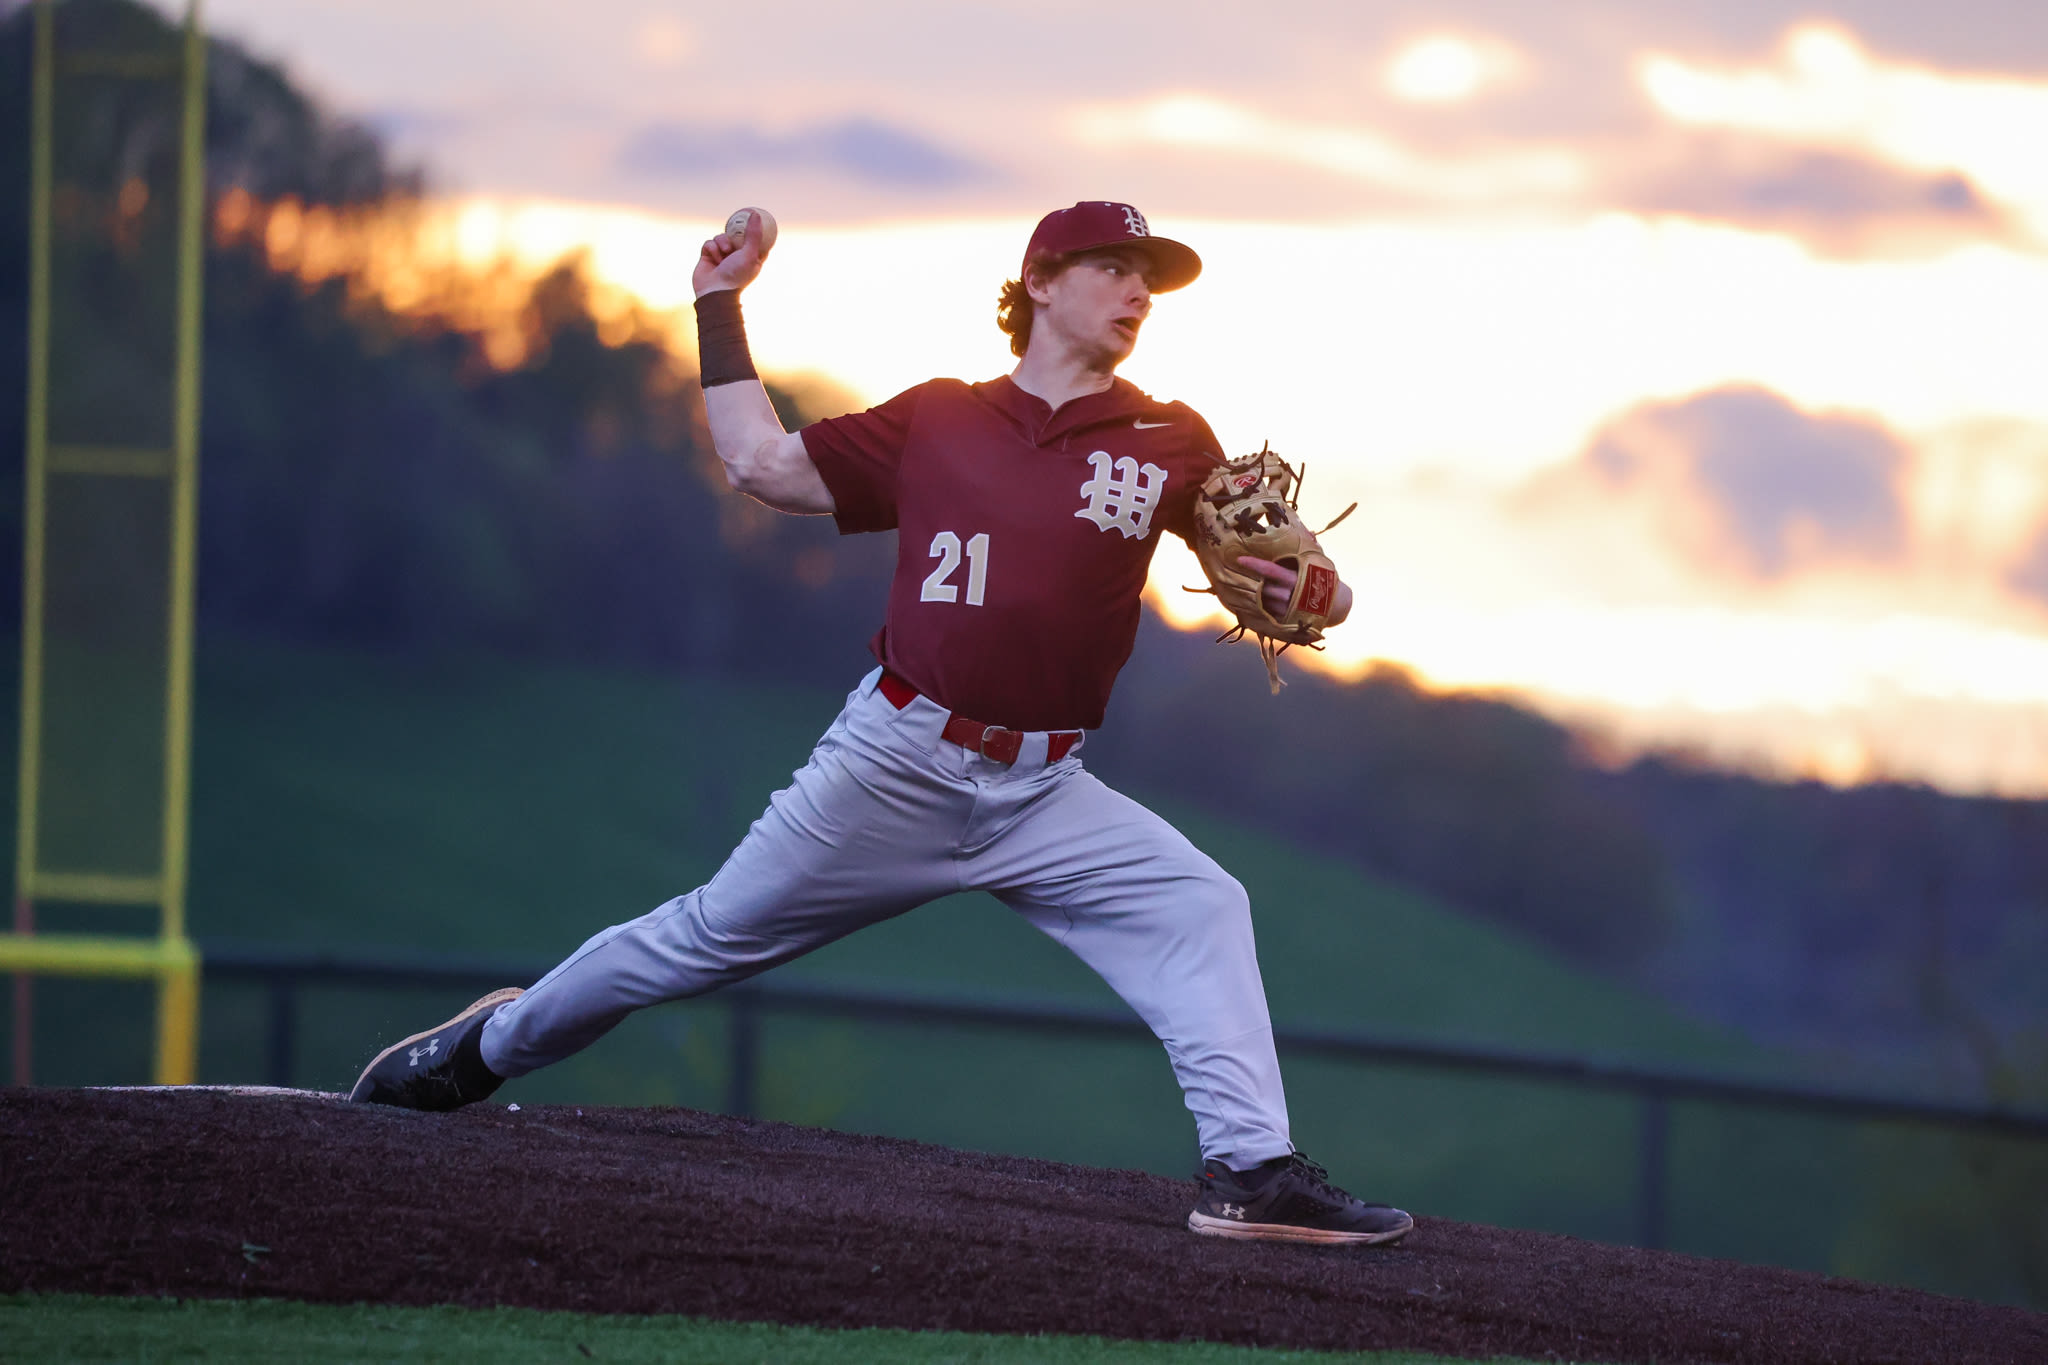 Class A state baseball: New champion to be crowned from balanced field of teams - WV MetroNews